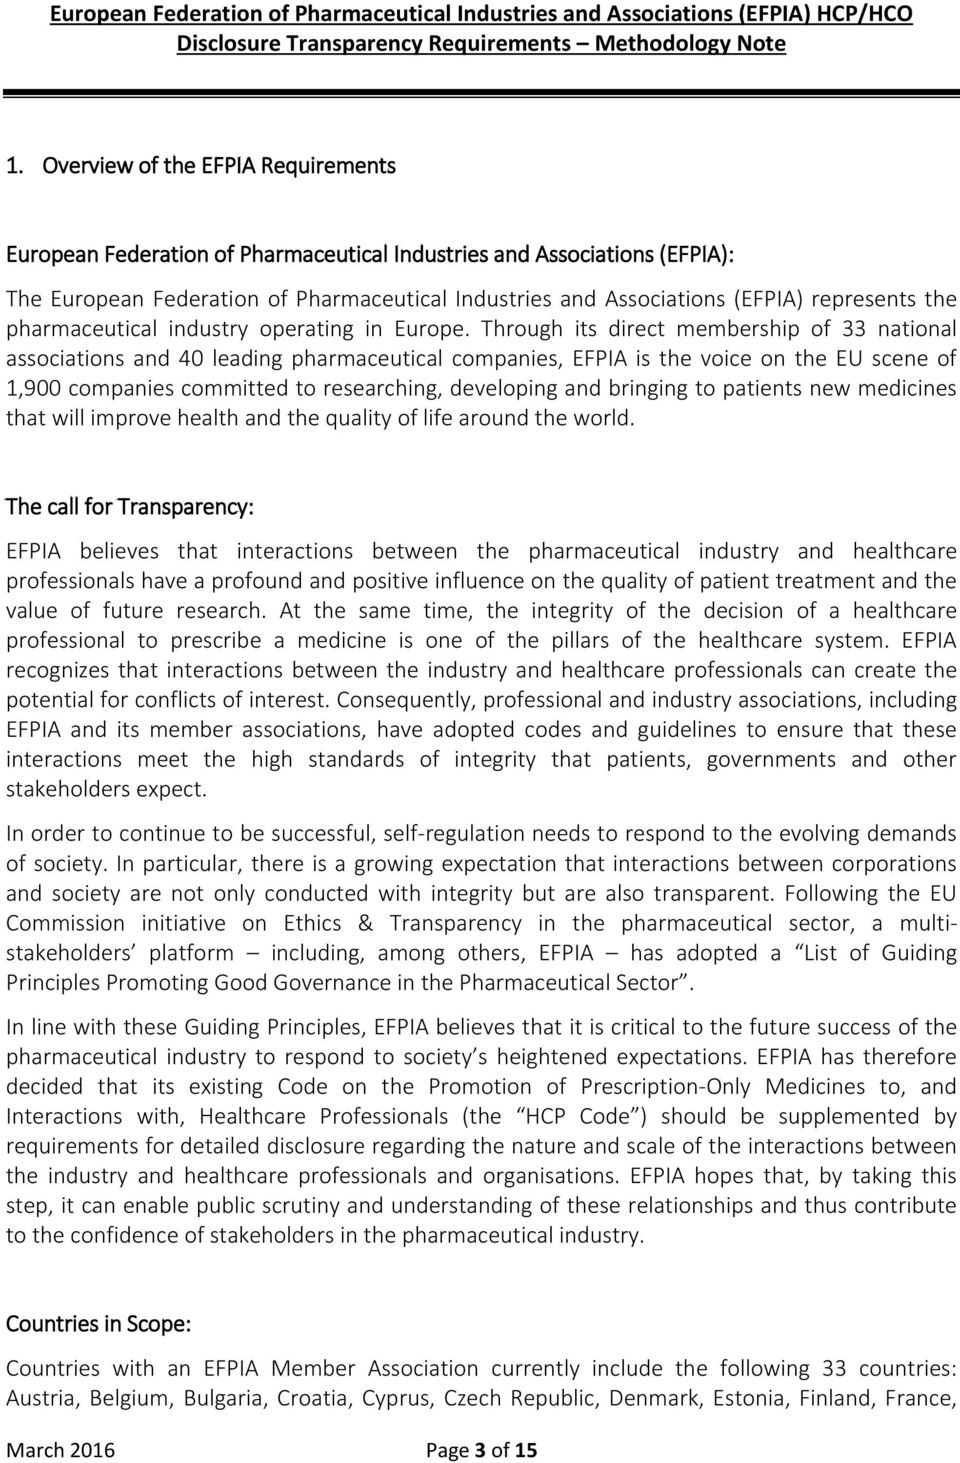 Through its direct membership of 33 national associations and 40 leading pharmaceutical companies, EFPIA is the voice on the EU scene of 1,900 companies committed to researching, developing and